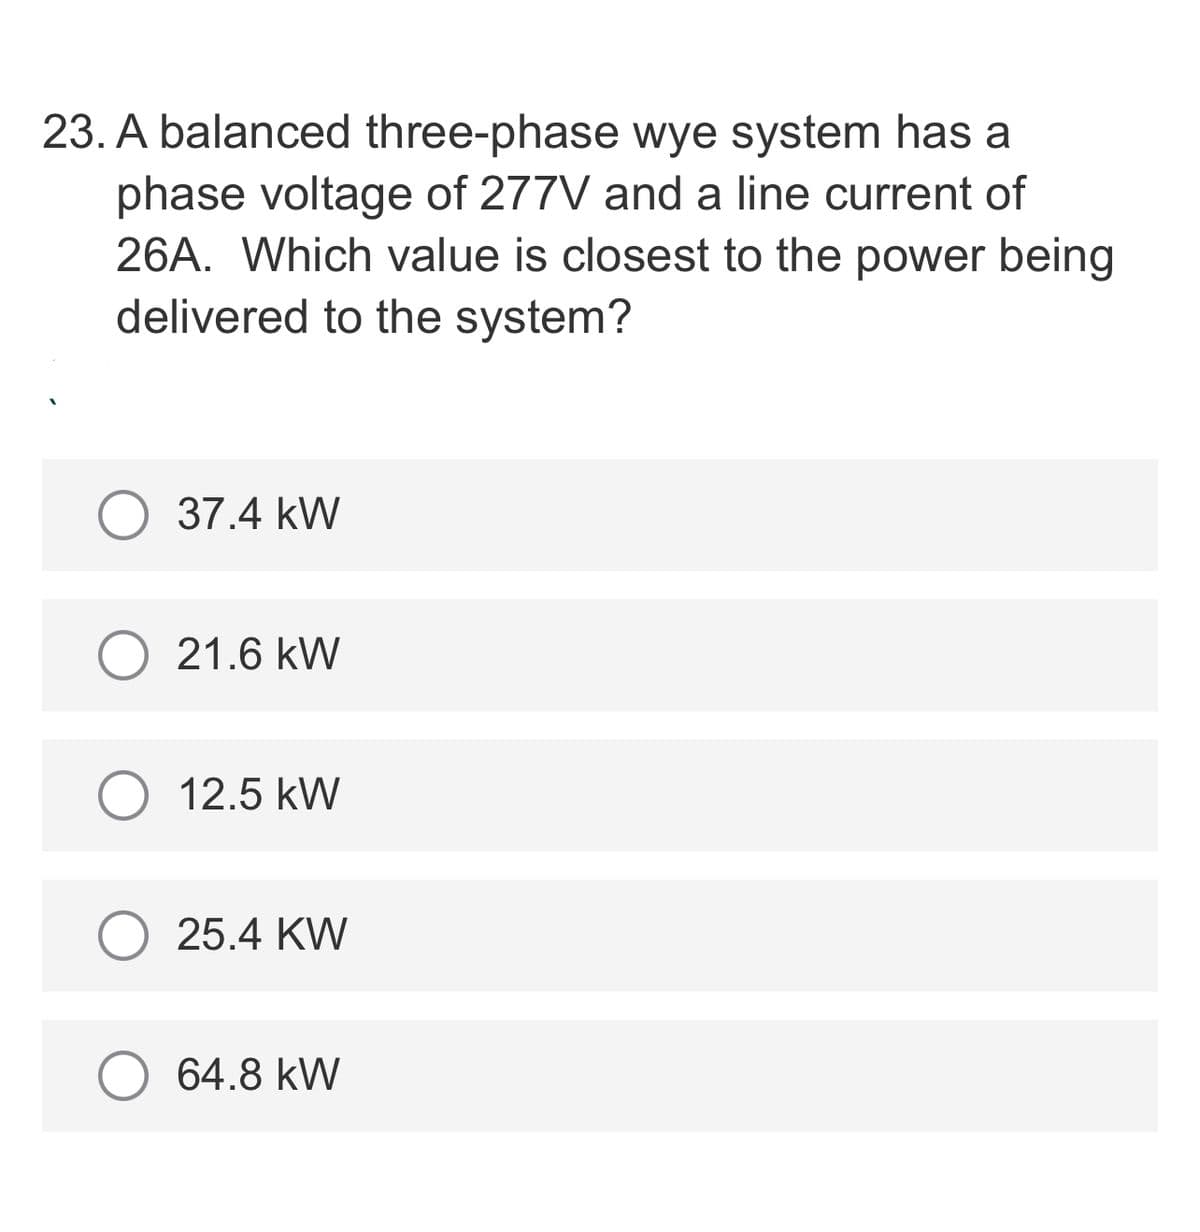 23. A balanced three-phase wye system has a
phase voltage of 277V and a line current of
26A. Which value is closest to the power being
delivered to the system?
37.4 kW
21.6 kW
12.5 kW
25.4 KW
64.8 kW
